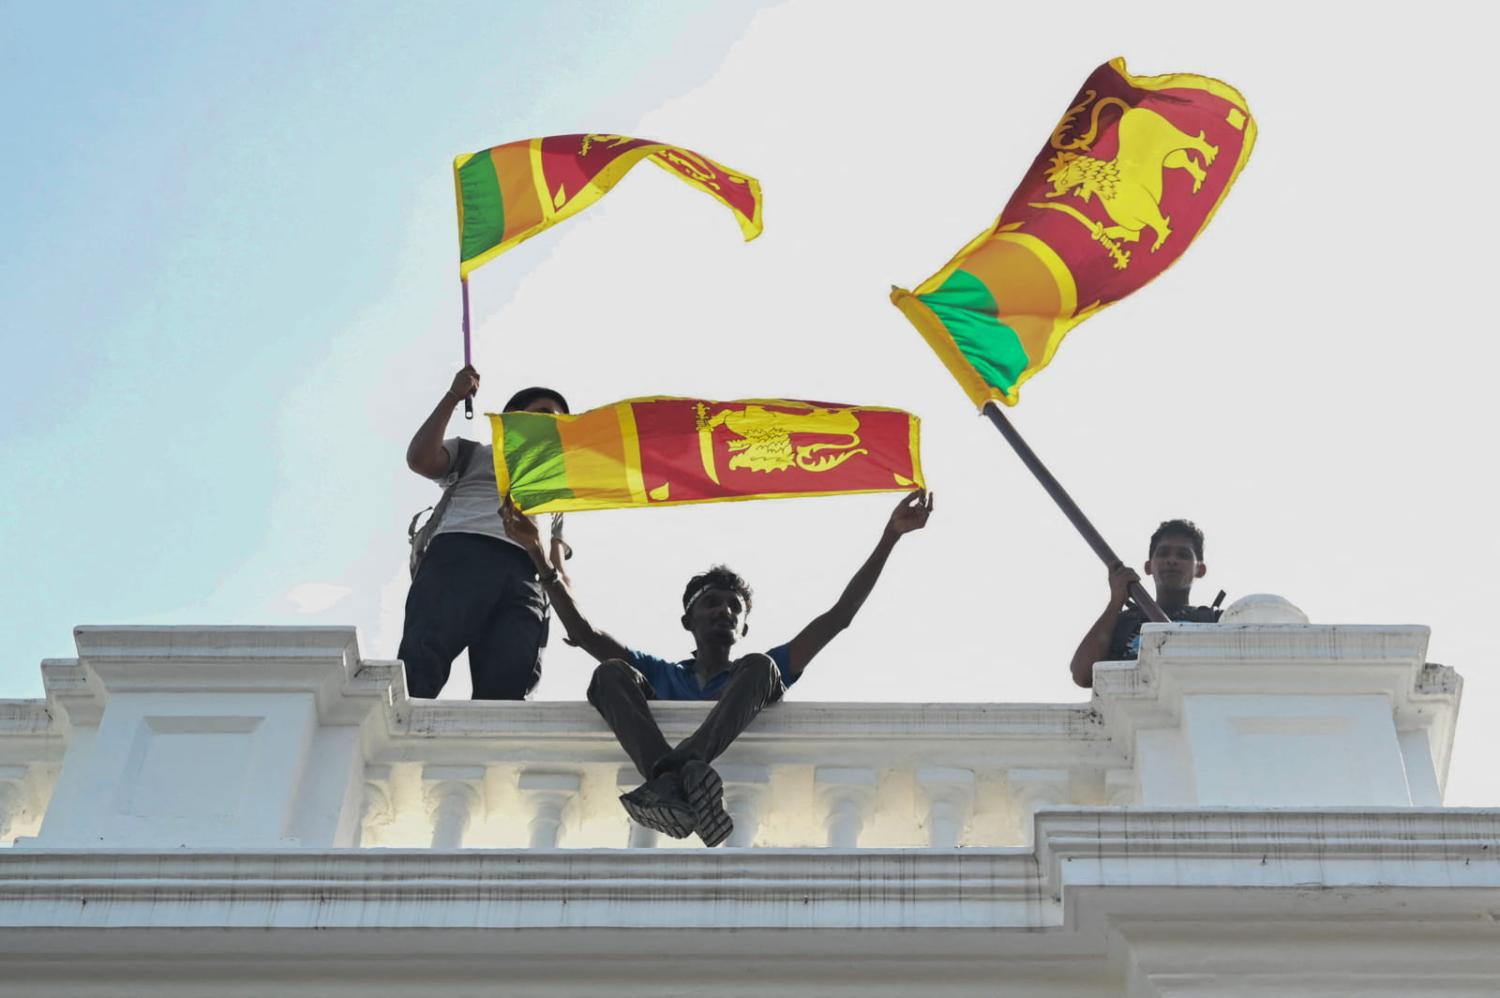 Demonstrators wave Sri Lankan flags from a balcony inside the office building of Sri Lanka's prime minister during an anti-government protest in Colombo on 13 July (Arun Sankar/AFP via Getty Images)